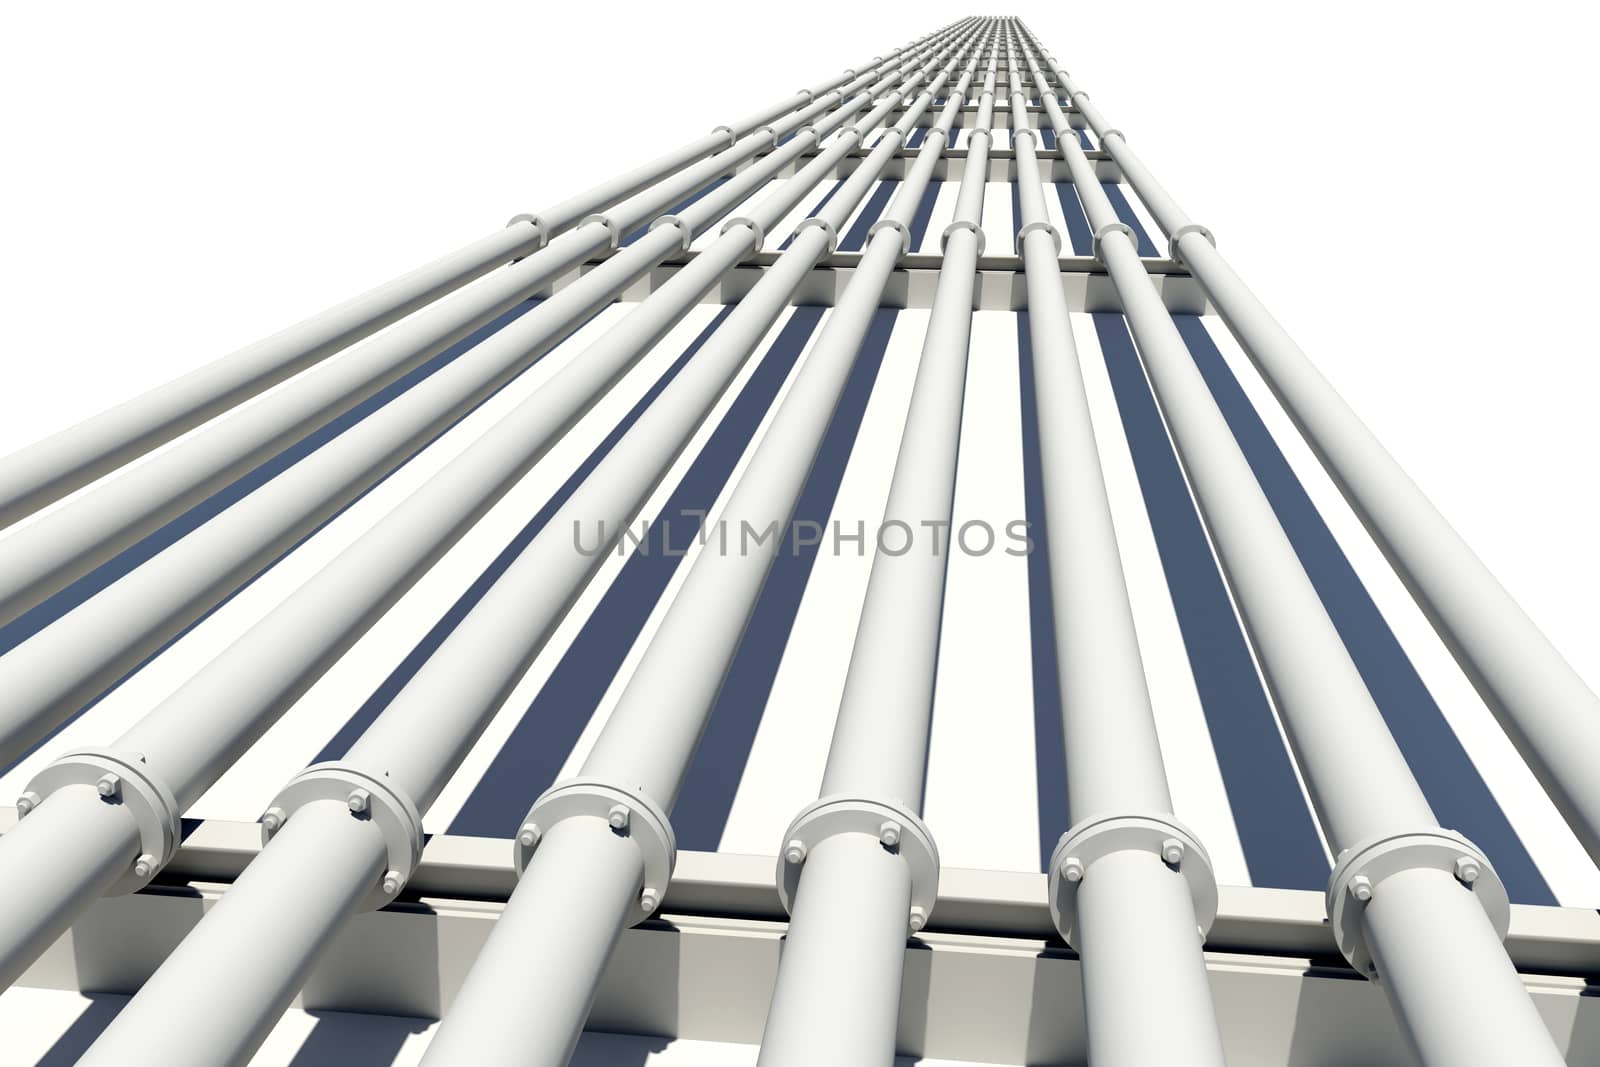 Industrial pipes stretching into distance. Isolated on white background